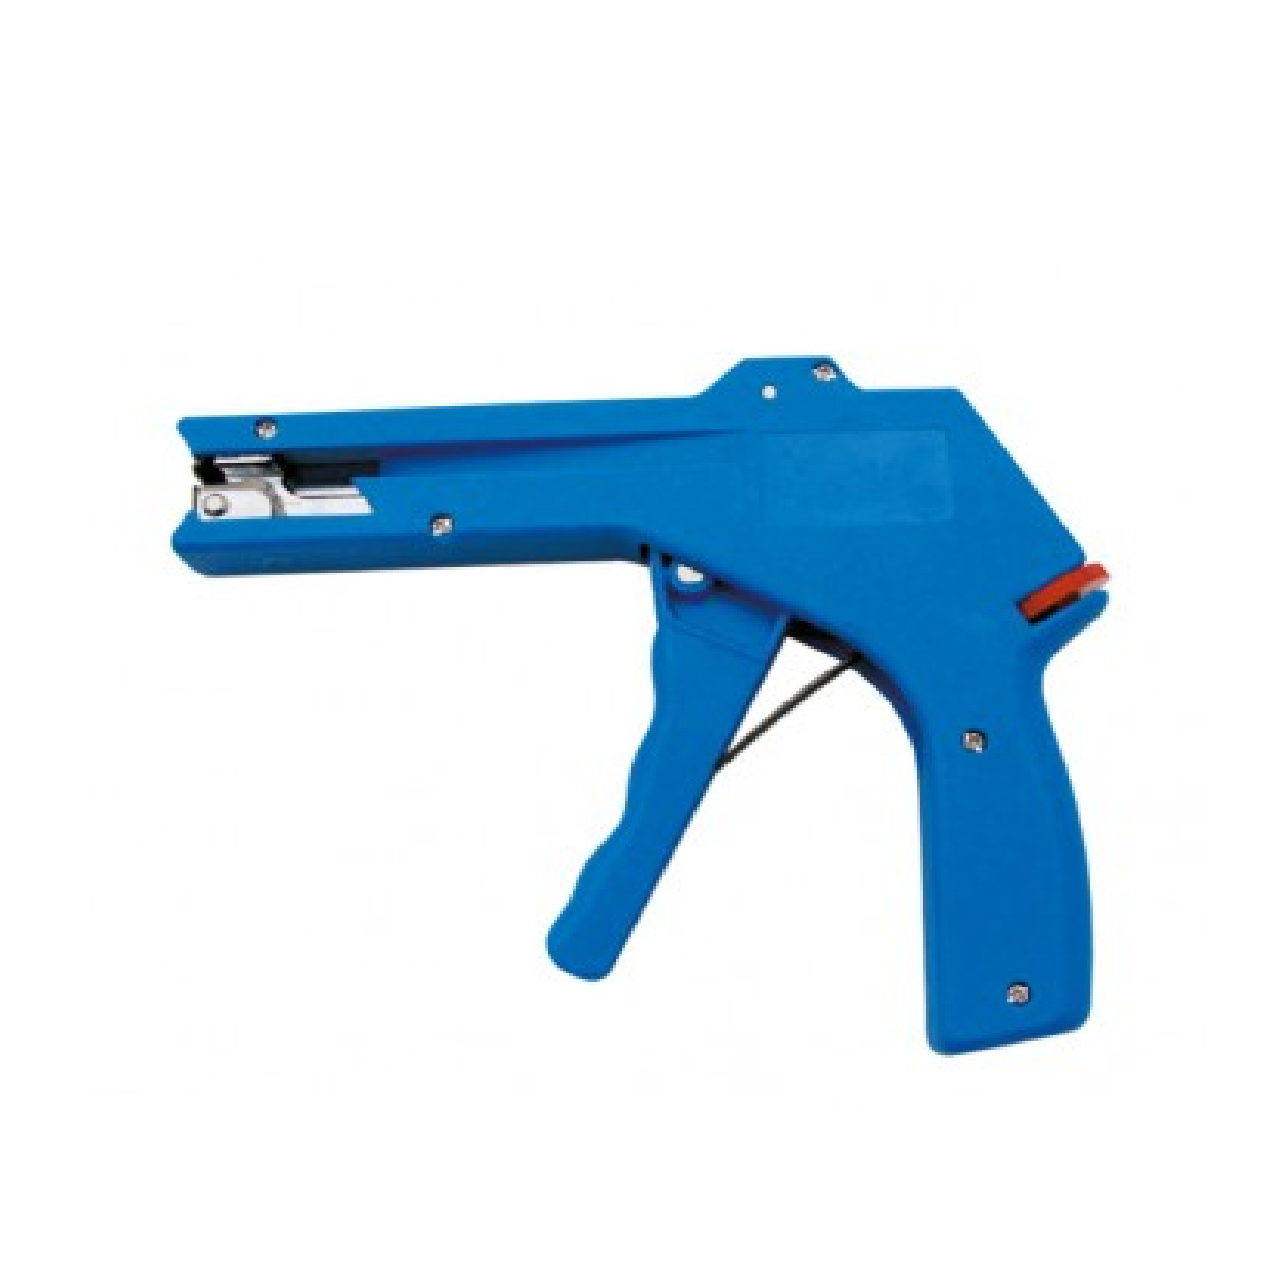 OPT TIE GUN 600A For PLASTIC Cable Ties